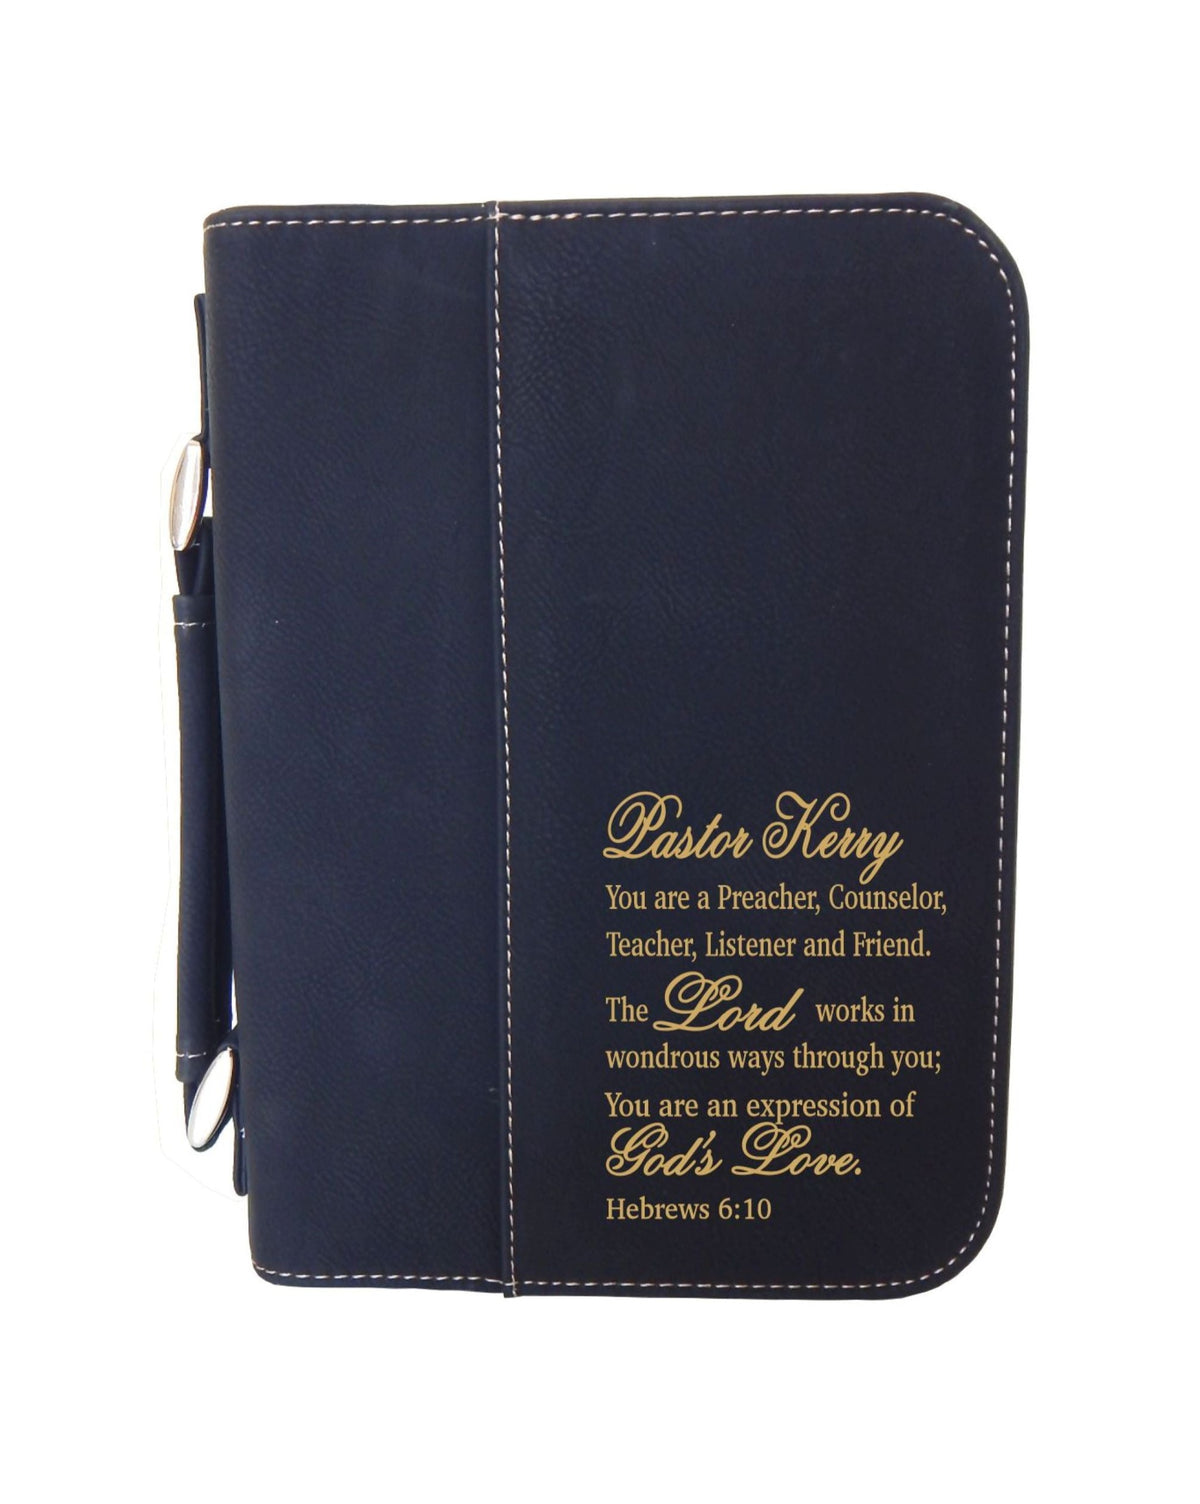 Personalized Bible Cover Gift for Pastor | Wedding Thank You Gifts | Bible Case